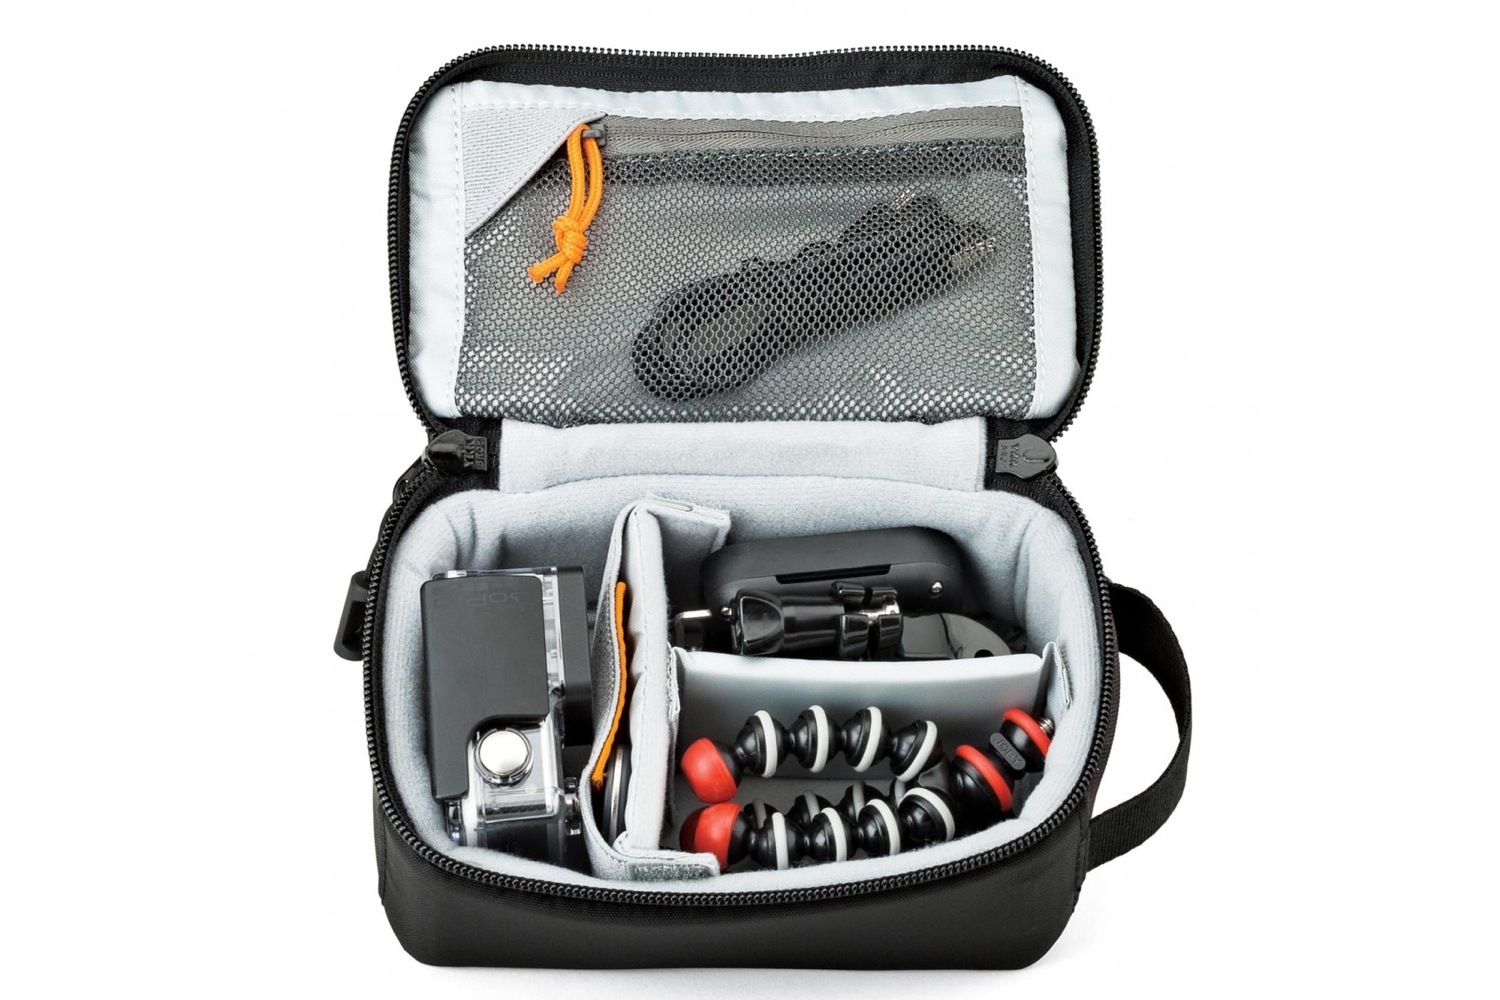 lowepro launches viewpoint bags designed to haul your action camera gear cs40 2